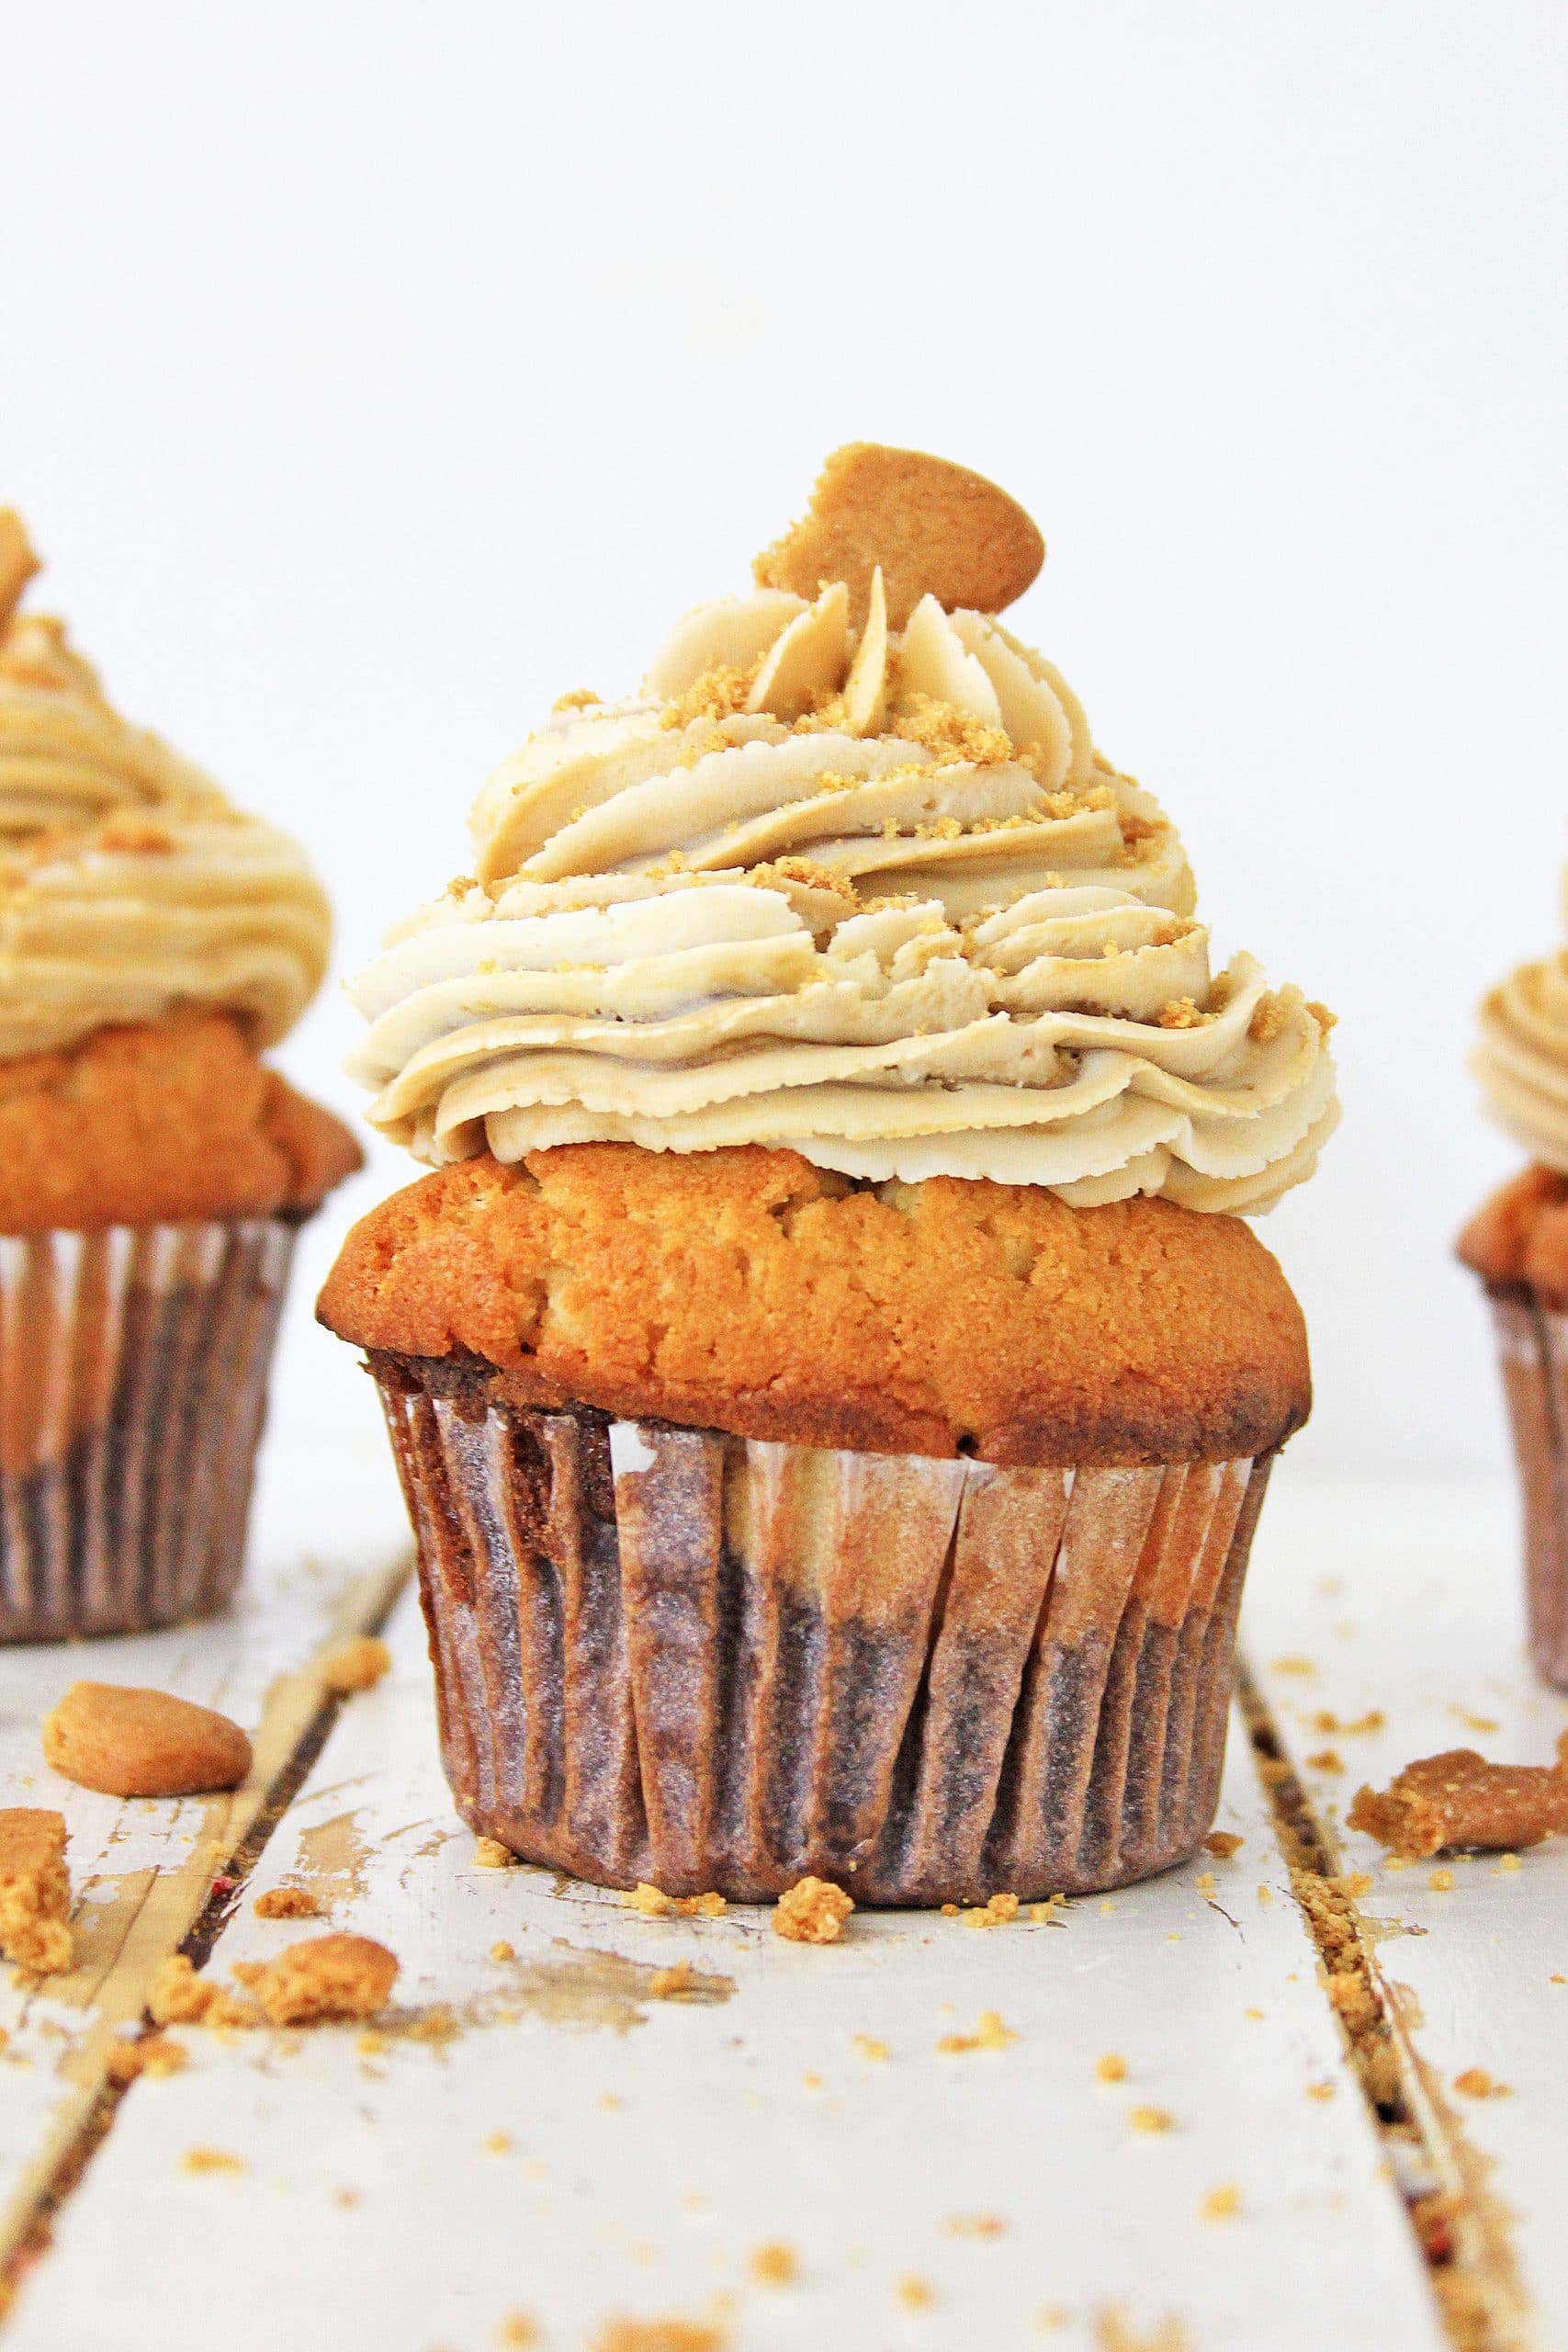 Yummy Gingerbread Cupcakes with Cream Cheese Frosting